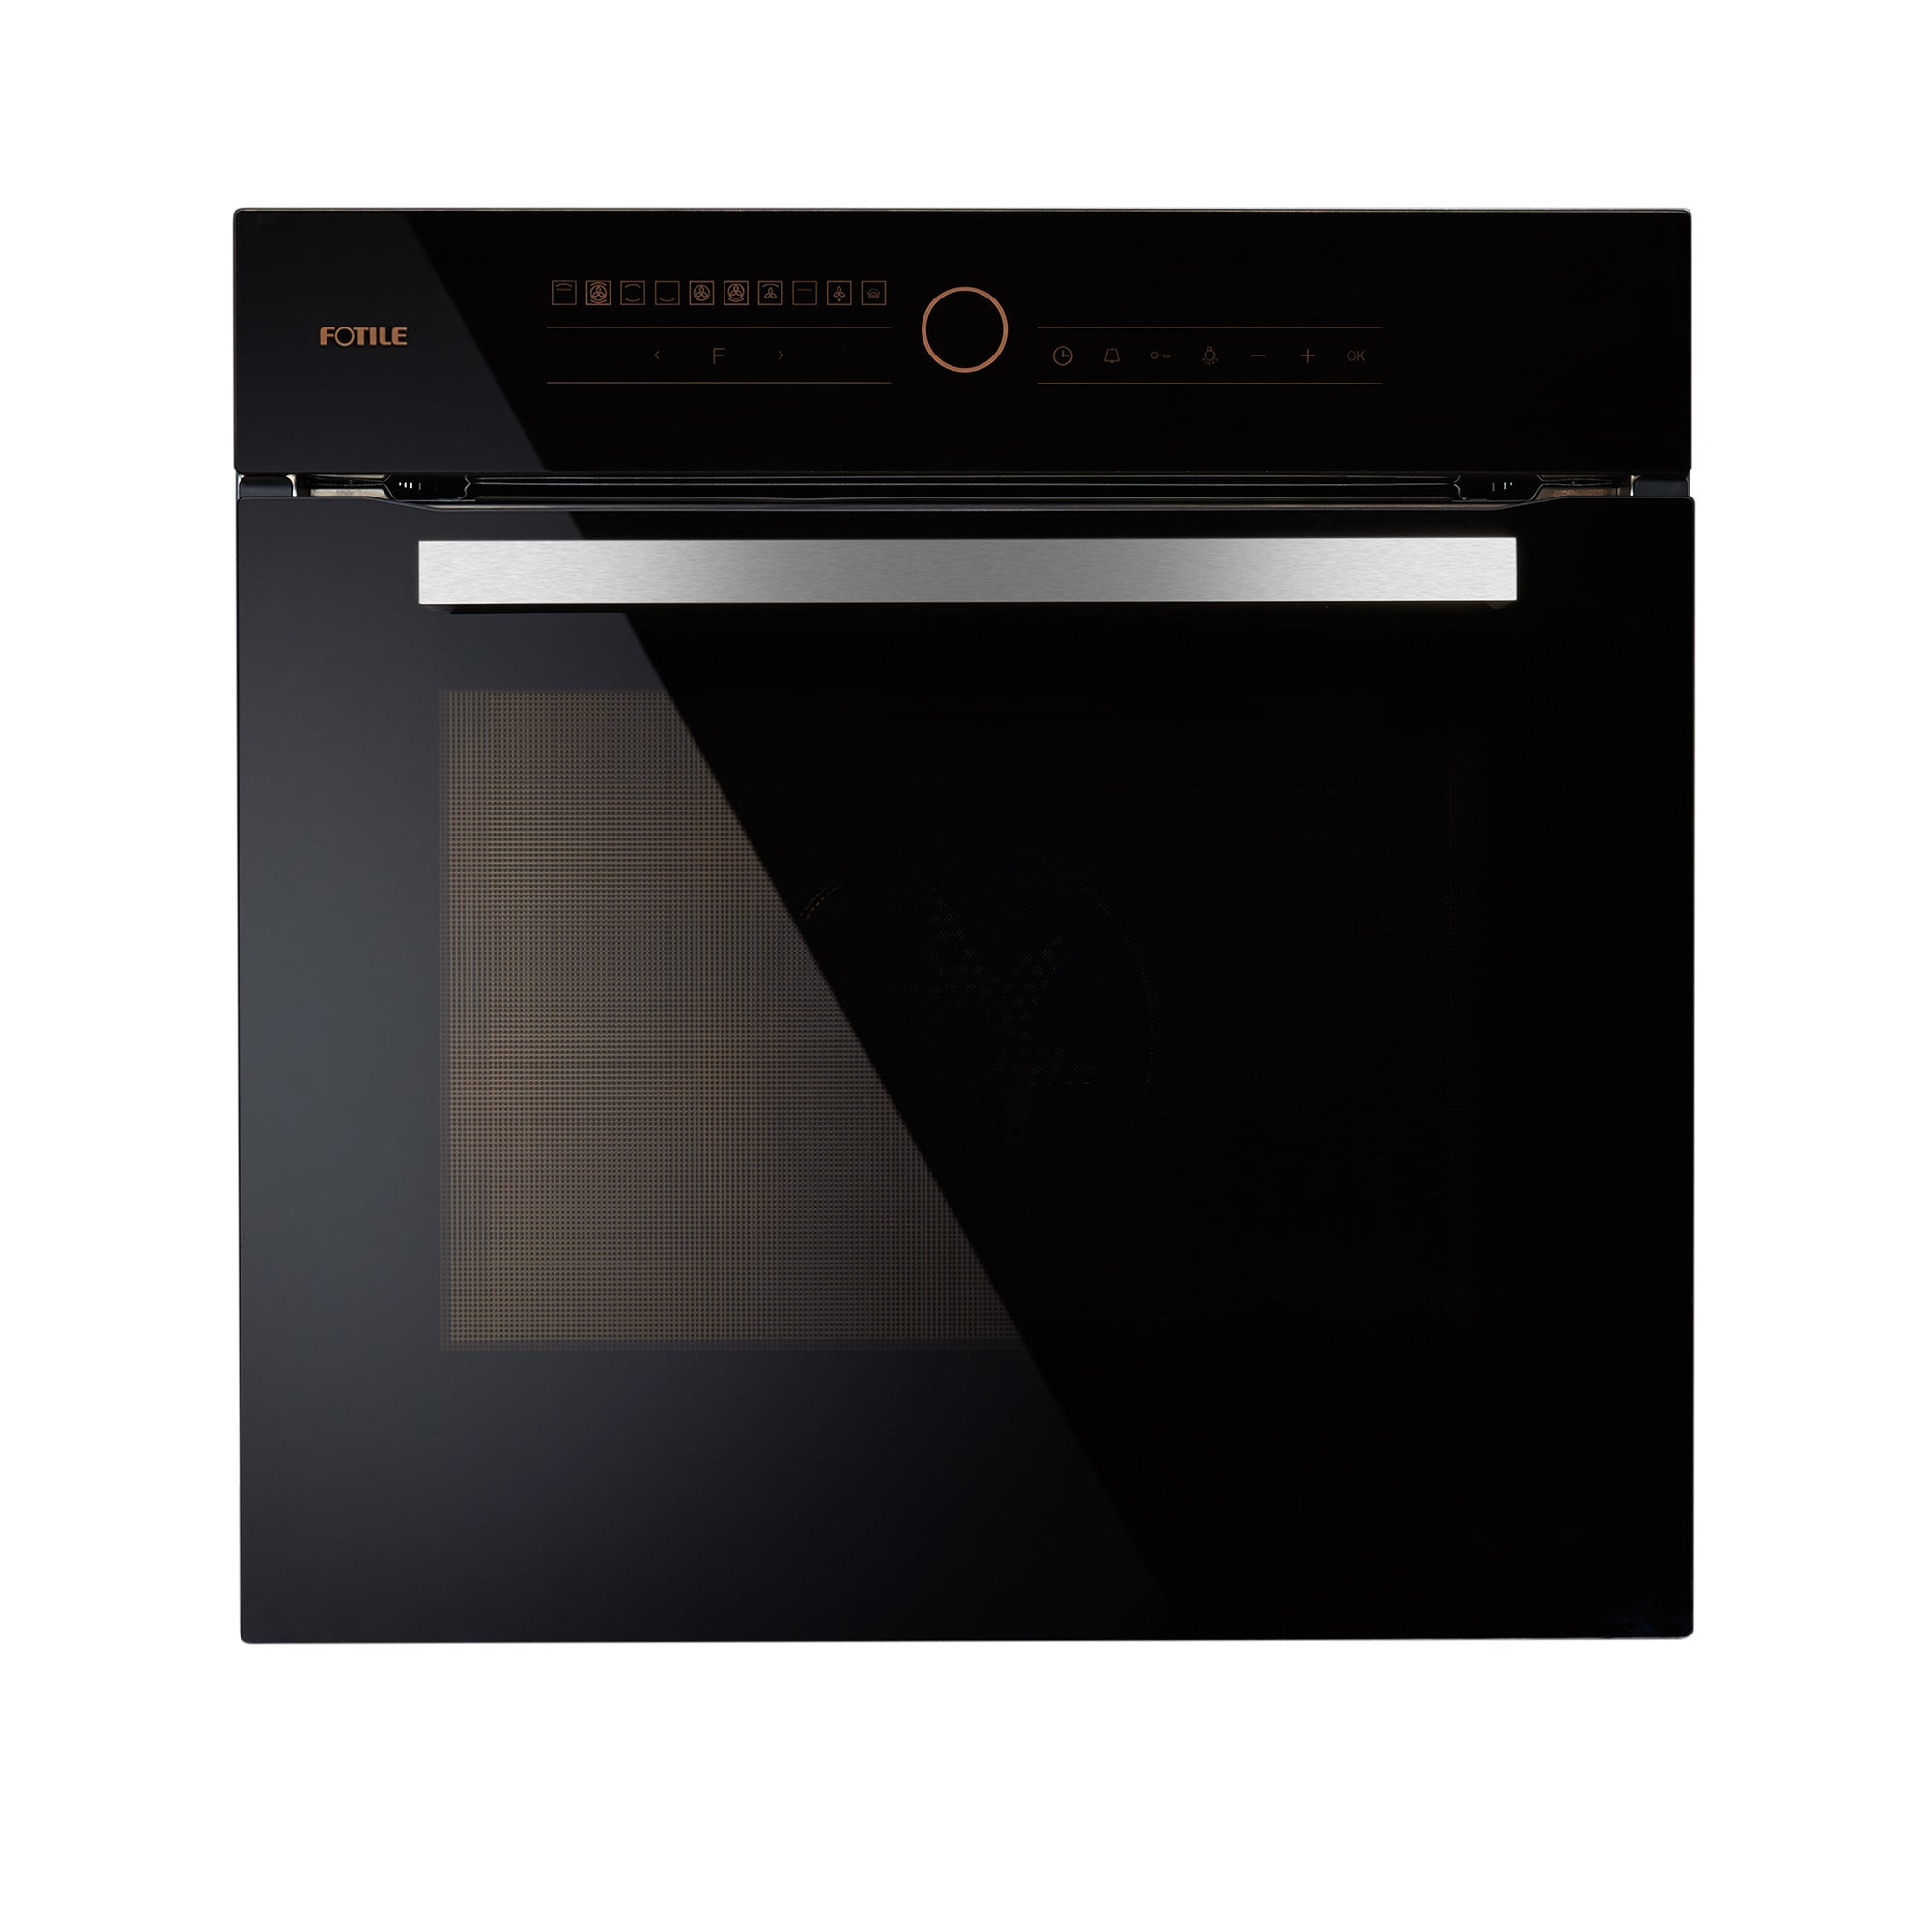 Fotile 24 in. Built-In Electric Wall Oven with Convection in Black Tempered Glass (KSG7003A)